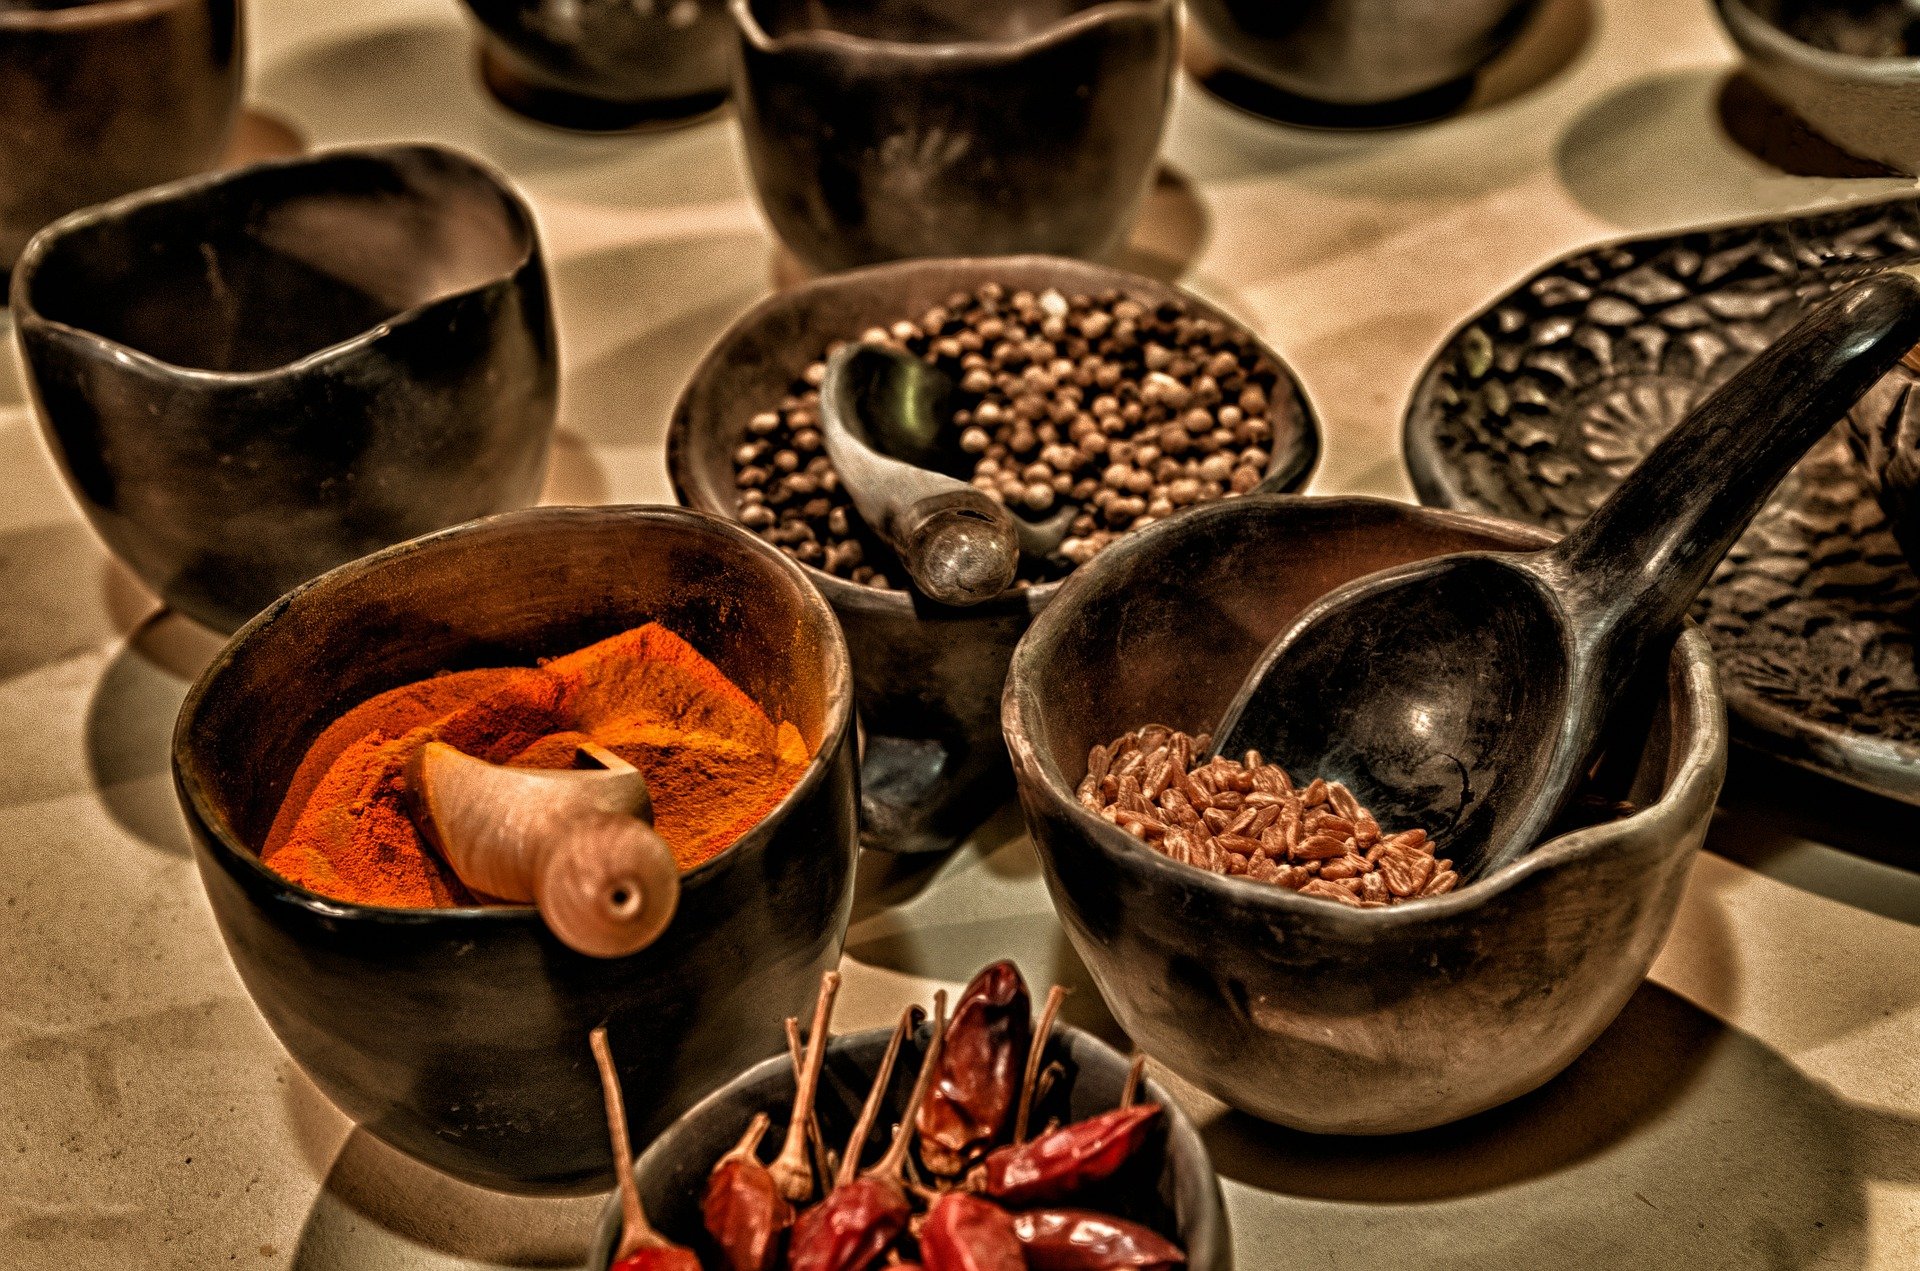 Image of Spices